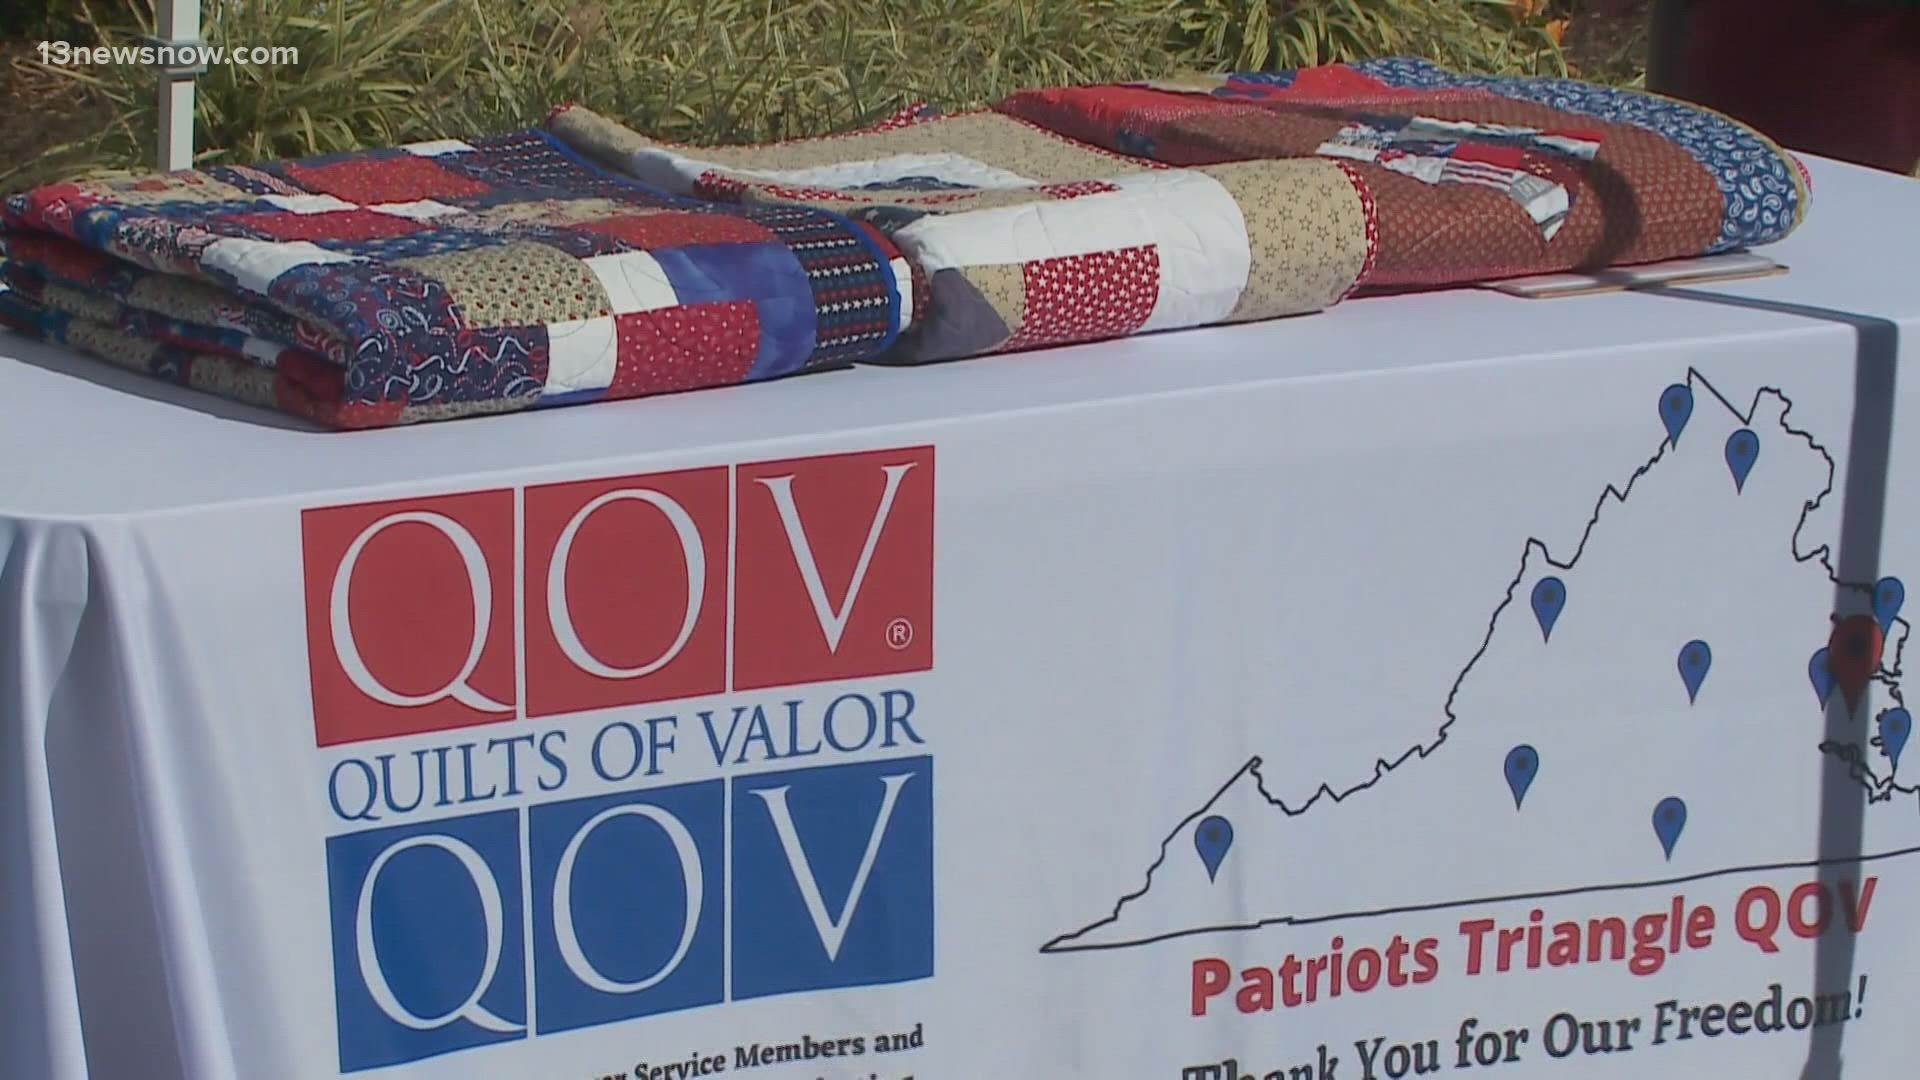 Three employees at Virginia Natural Gas were presented with Quilts of Valor as a token of appreciation for their service in the military.